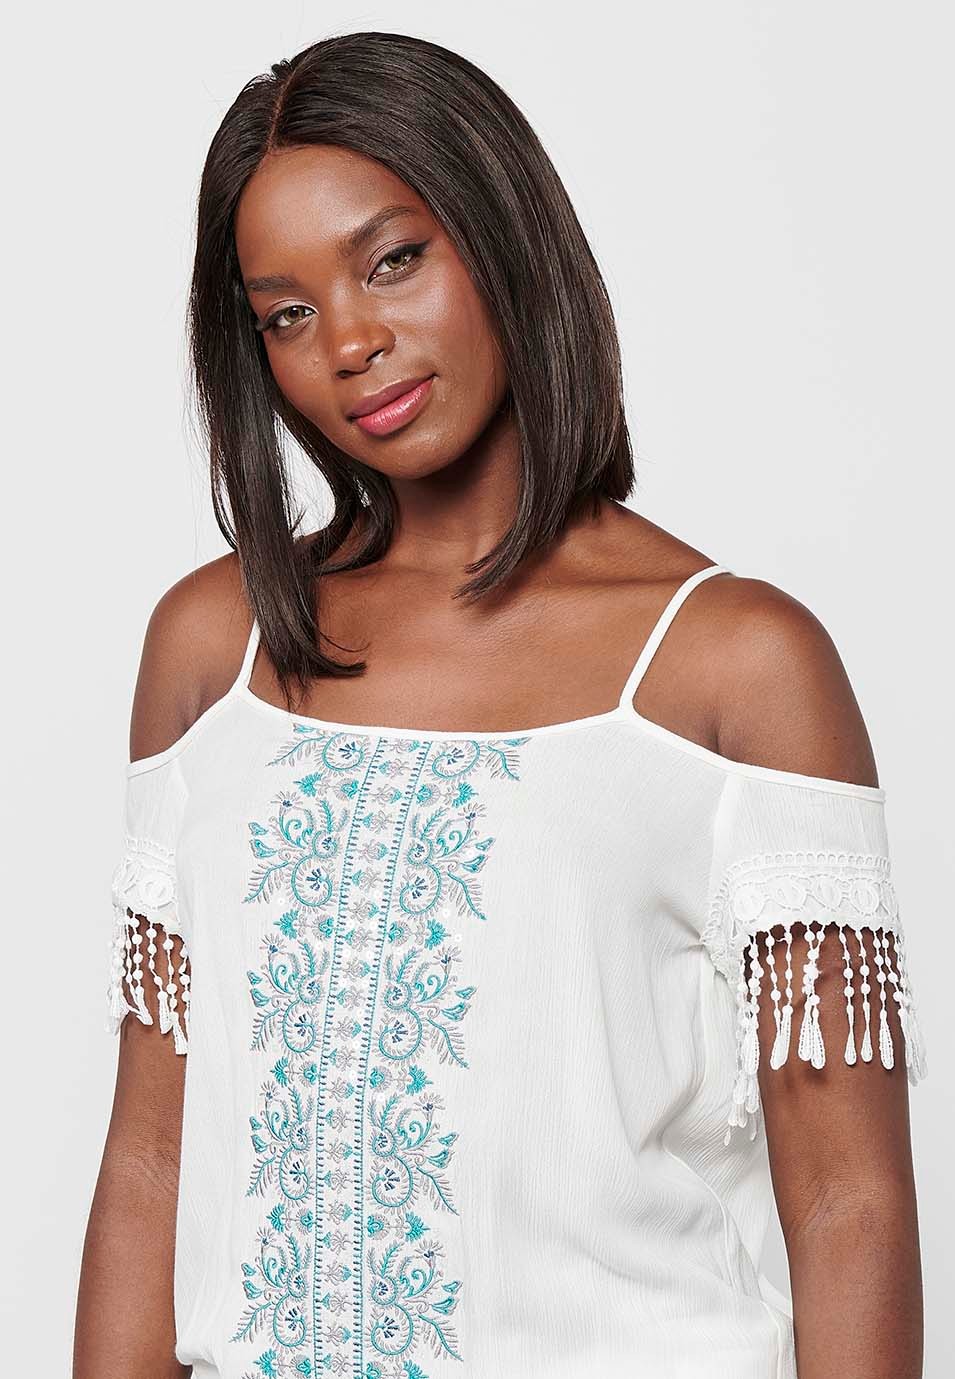 White Tank Top with Floral Embroidered Details and Round Neckline with Rubberized Low Waist for Women 1